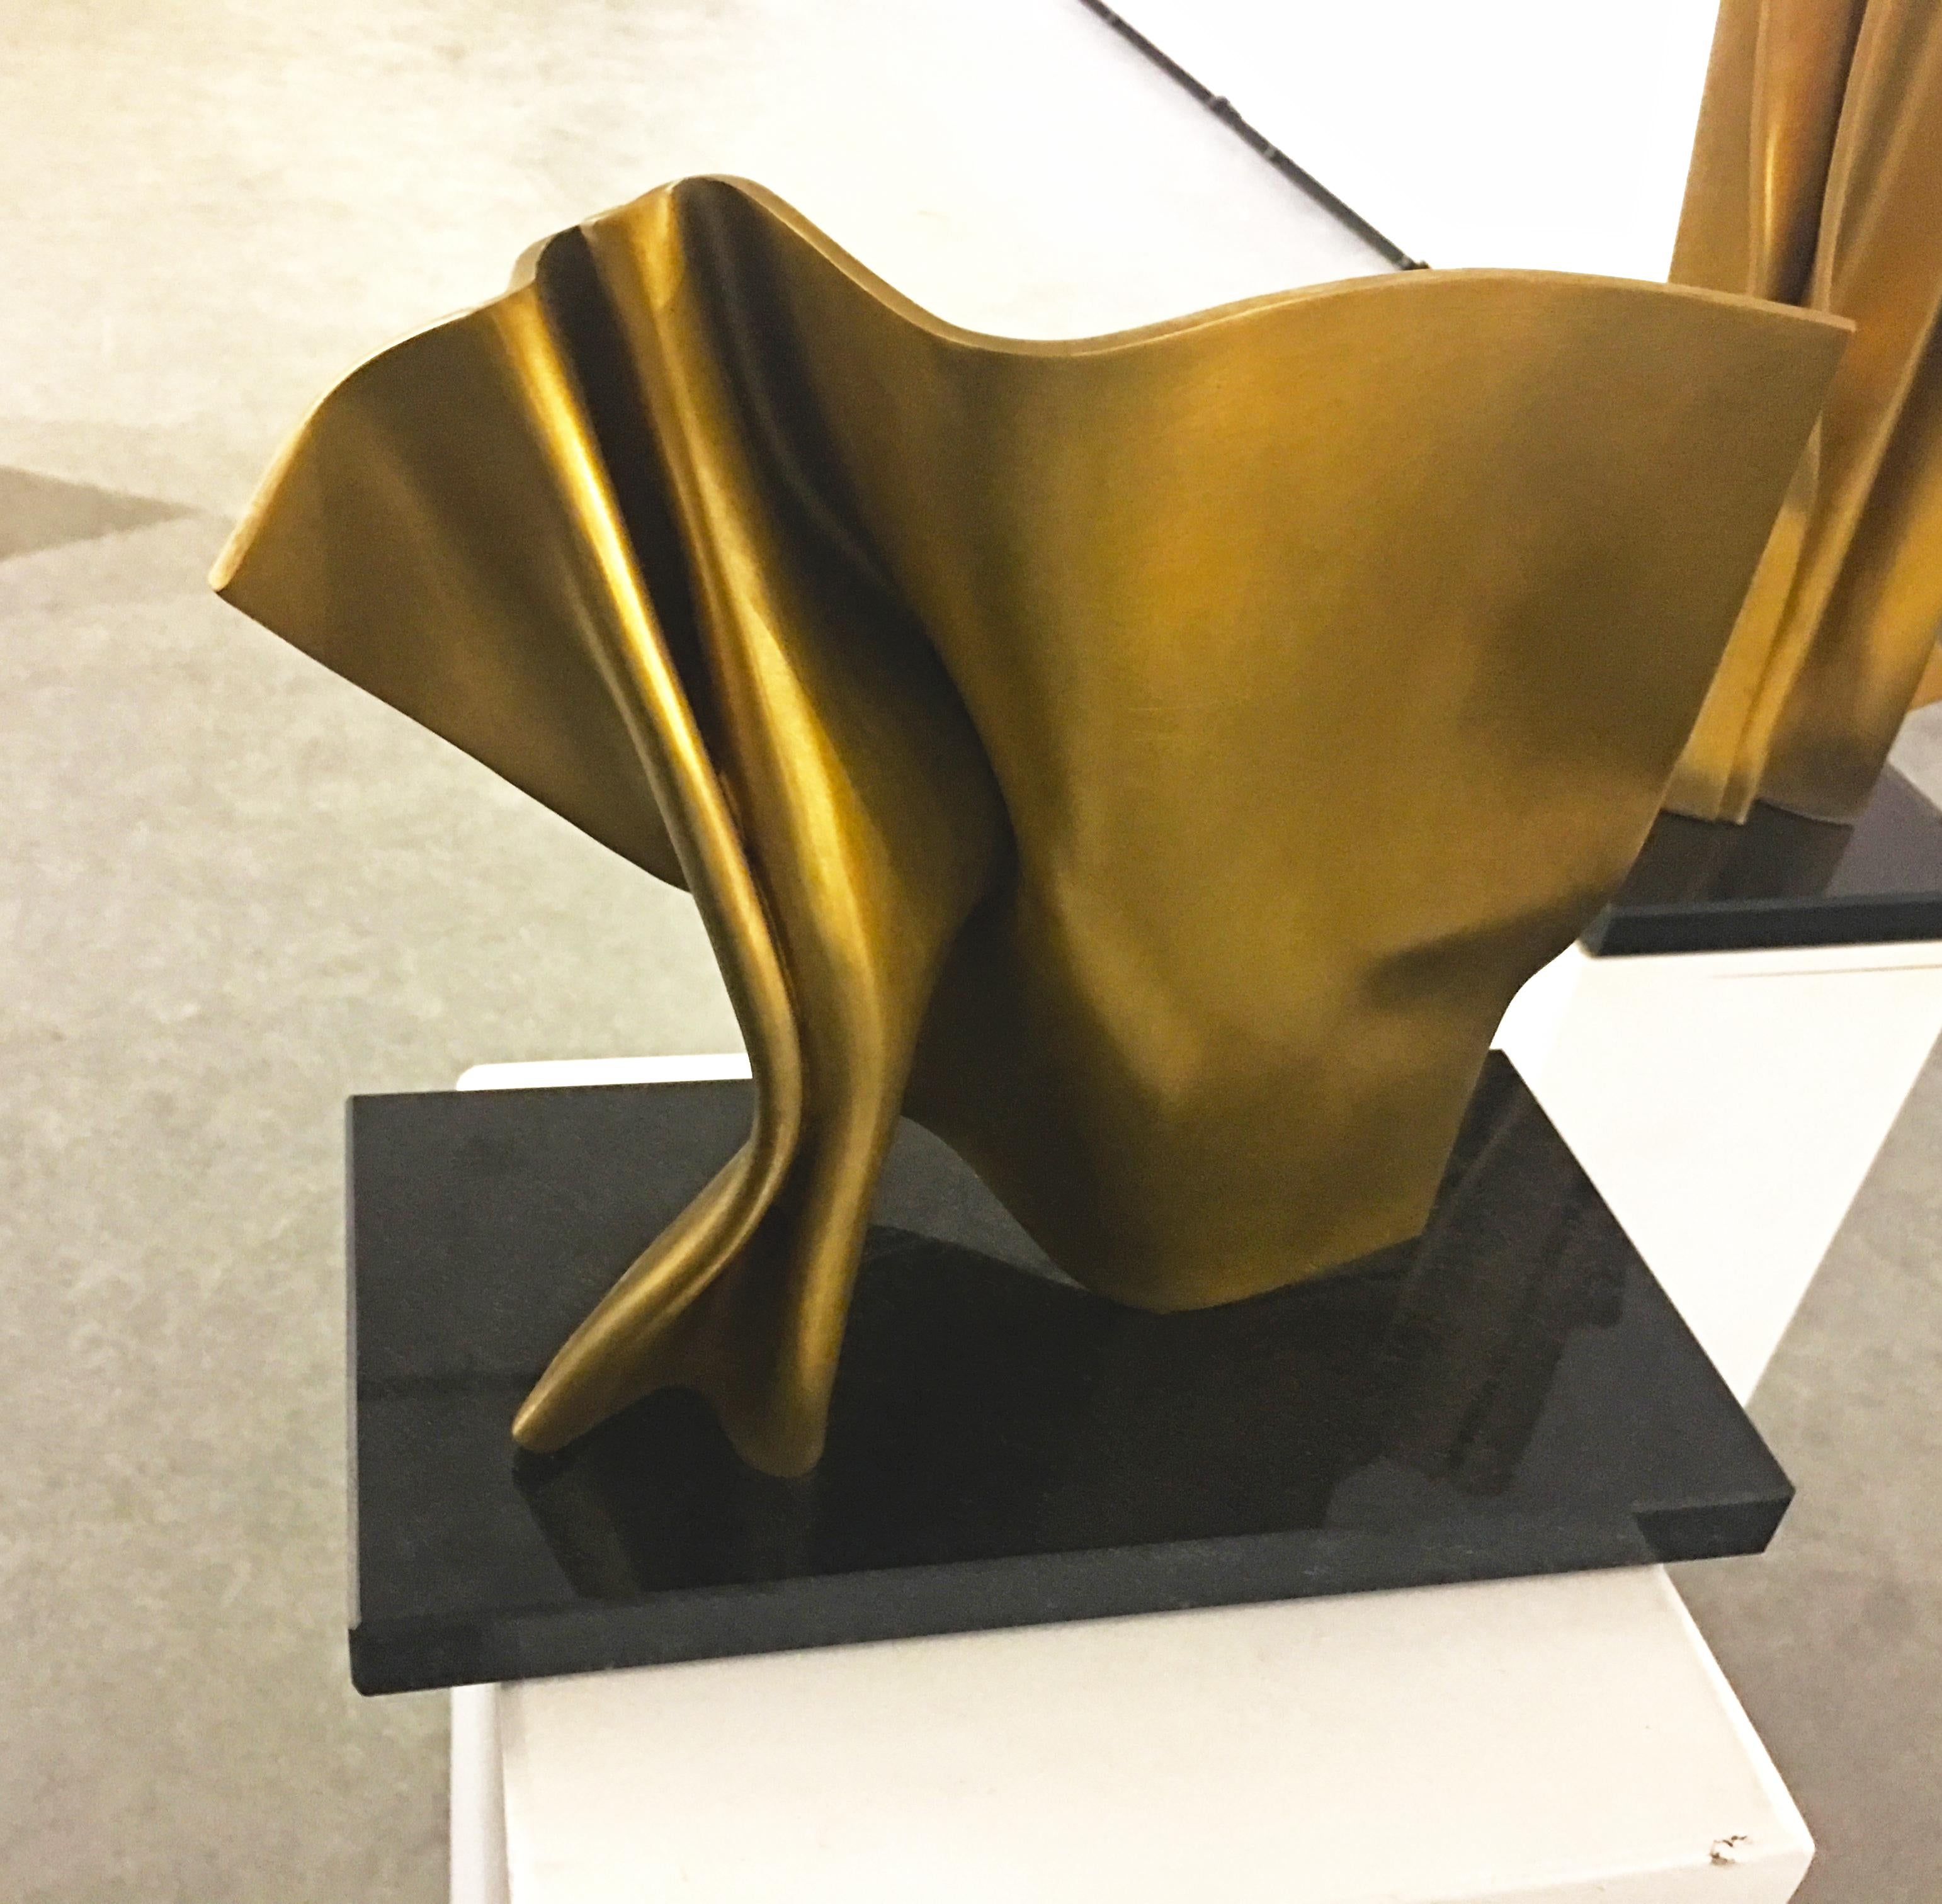 Golden Fold by Kuno Vollet - Contemporary polished Bronze sculpture granite base 4